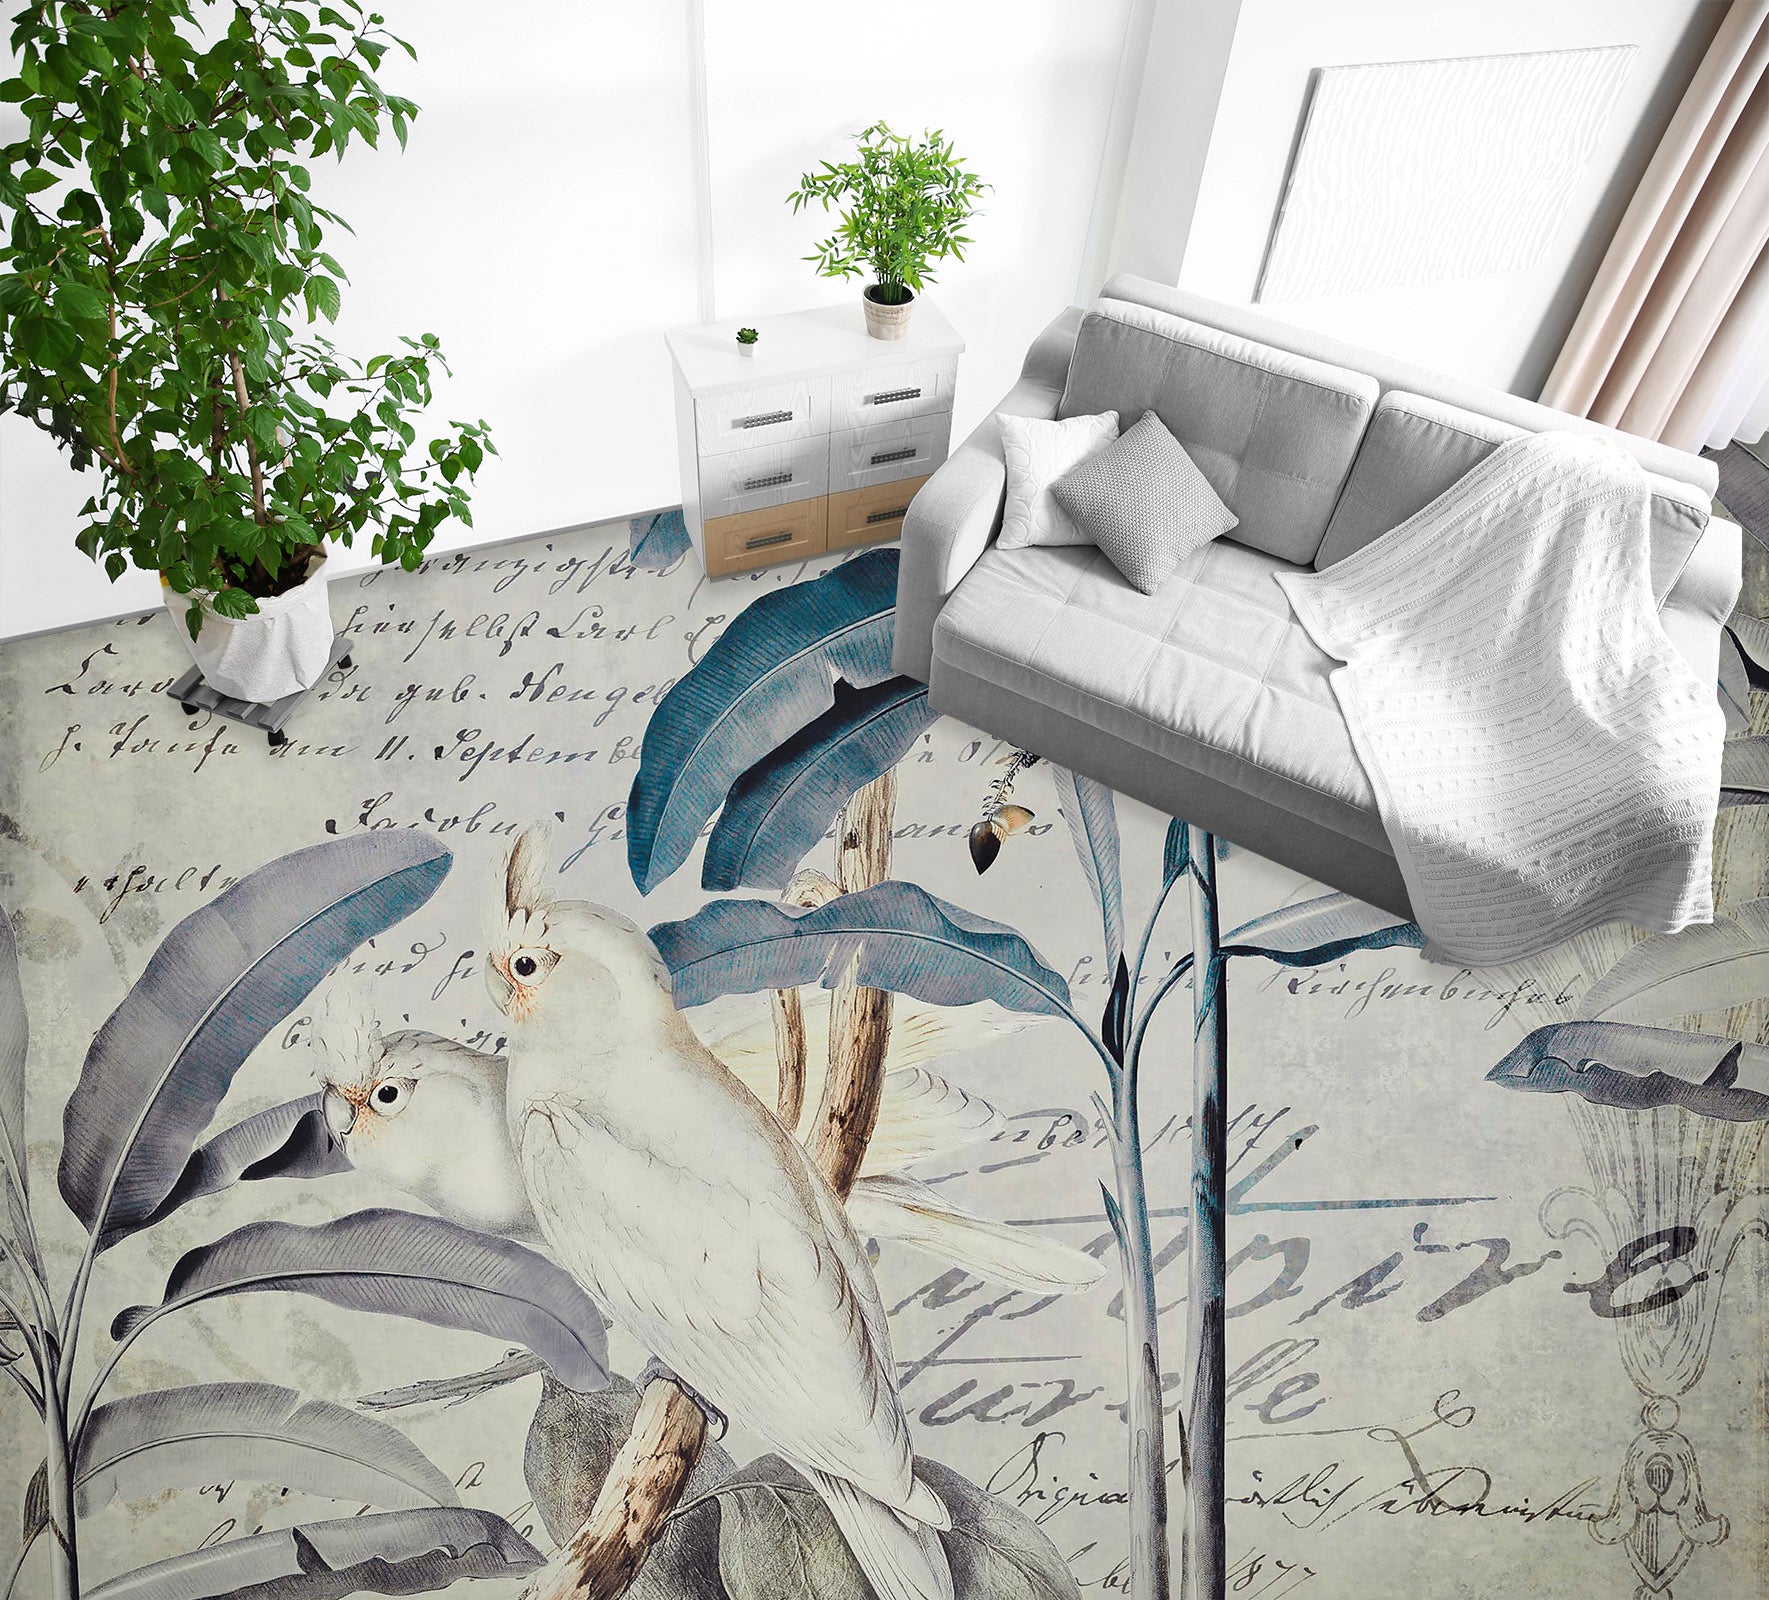 3D Leaves White Parrot 104161 Andrea Haase Floor Mural  Wallpaper Murals Self-Adhesive Removable Print Epoxy